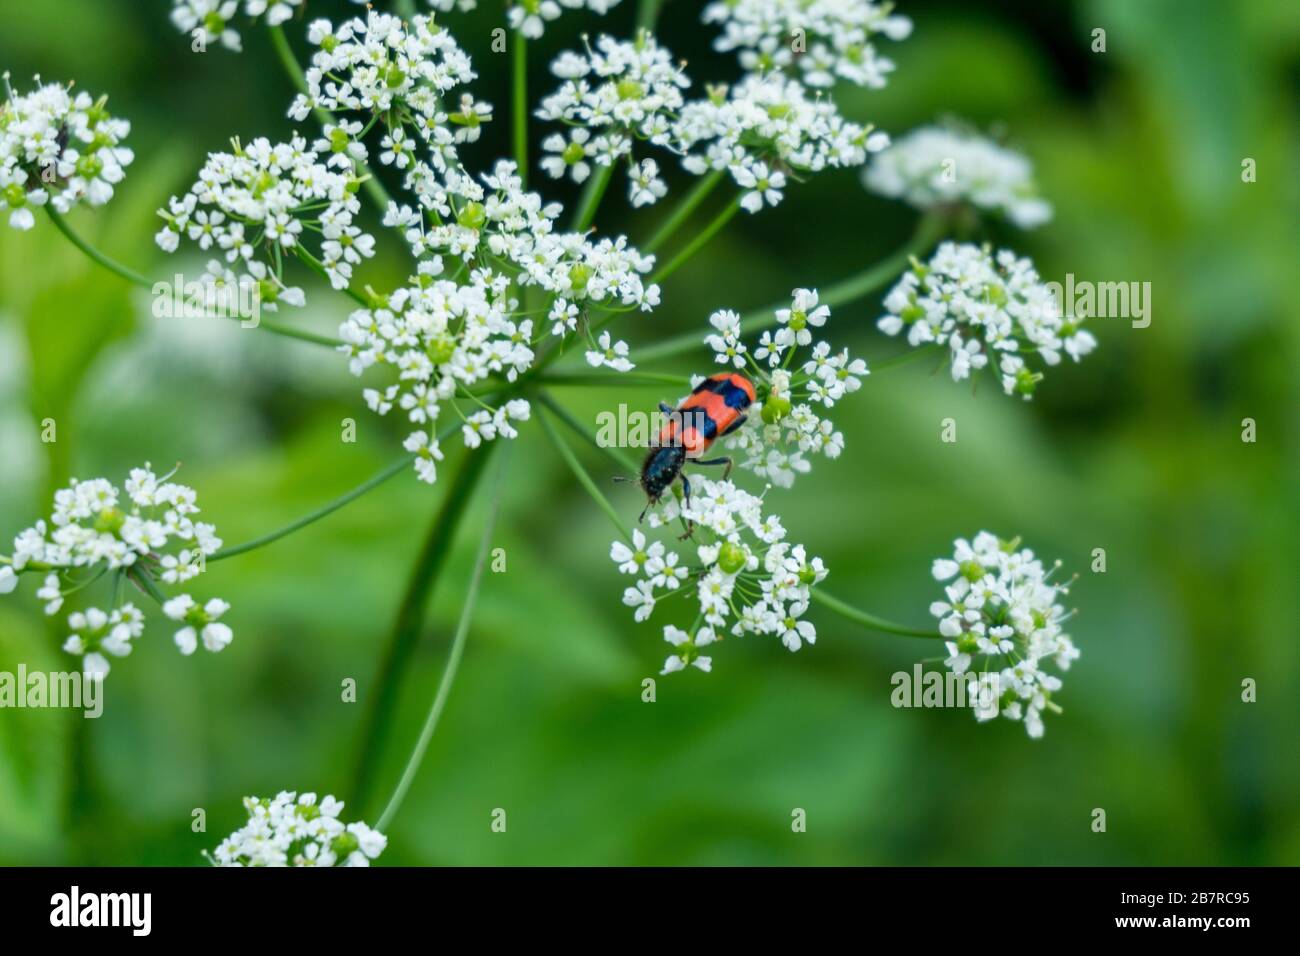 Closeup shot of a bug on cow parsley with a blurred background Stock Photo